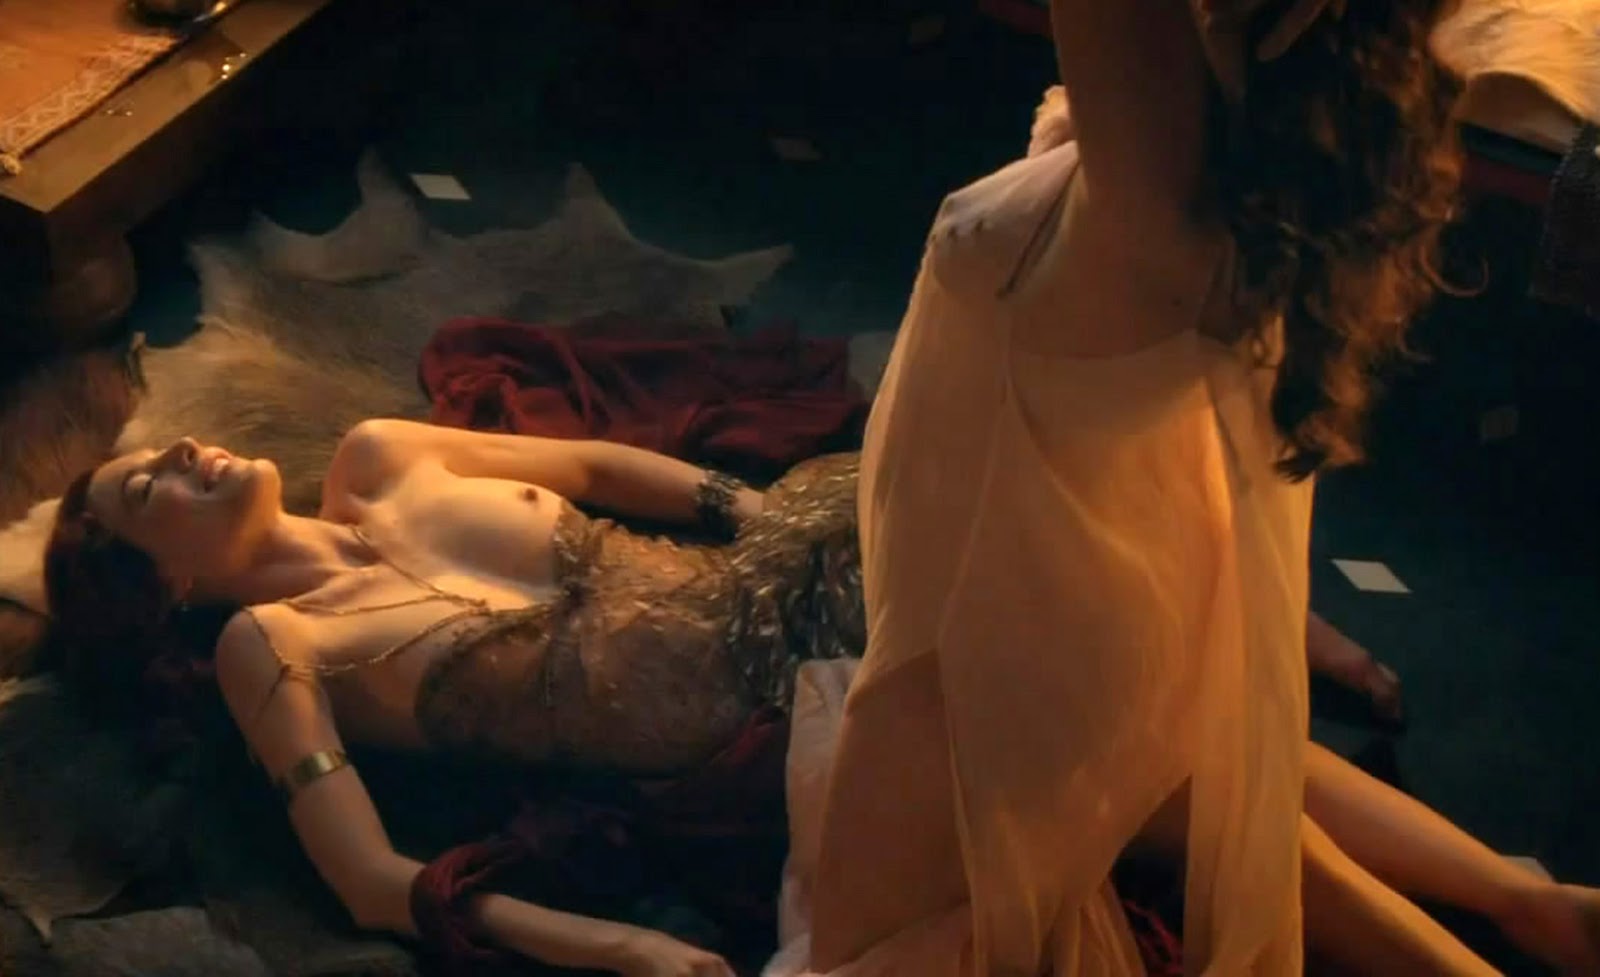 Lucy lawless nude in spartacus